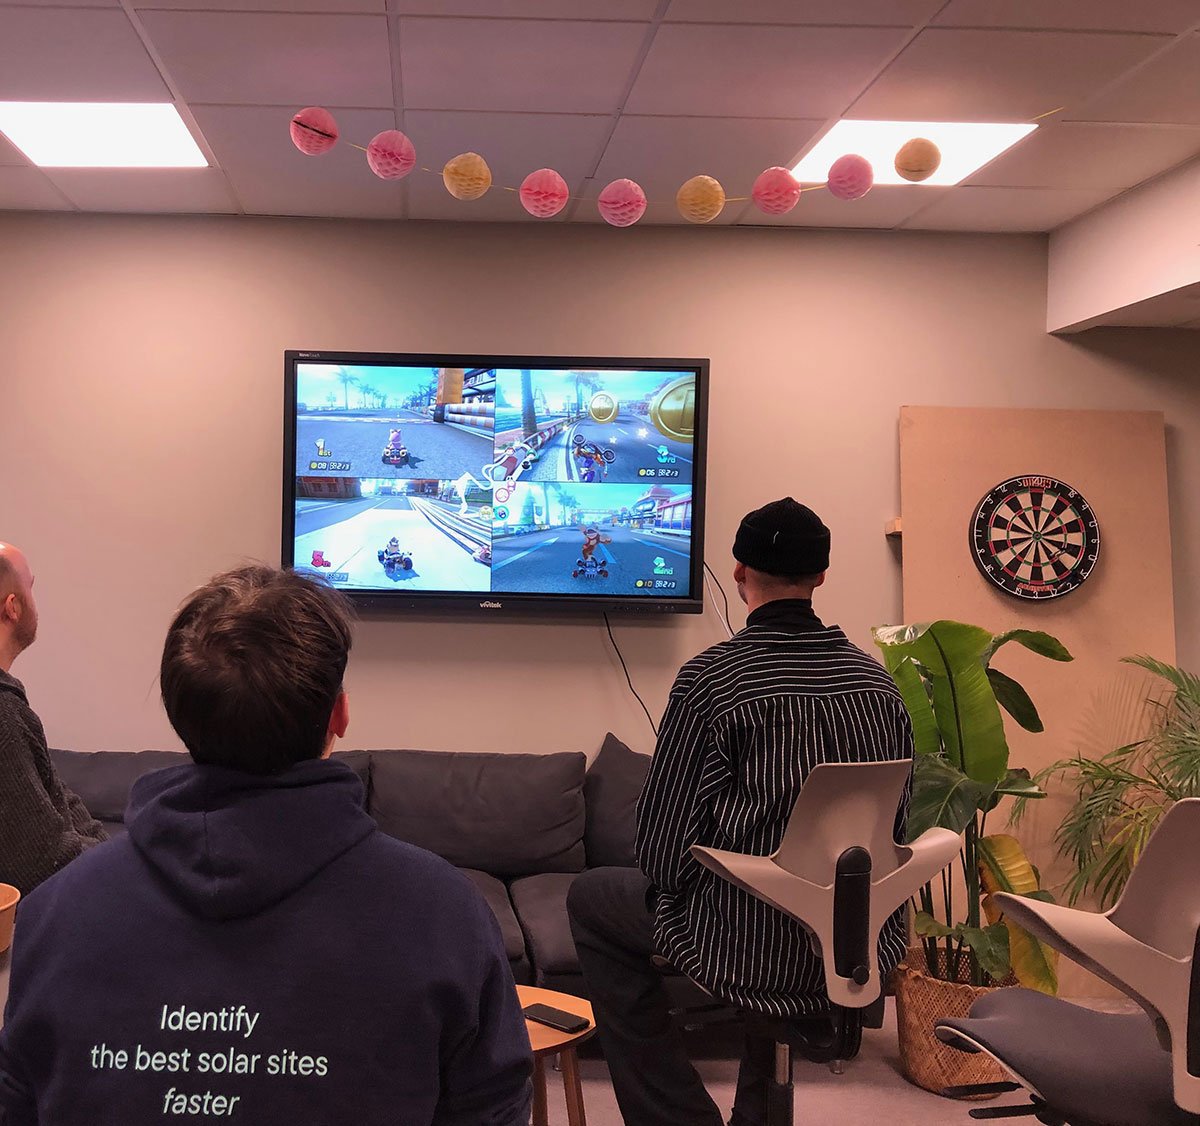 Three team members playing Mario Kart in front of a large TV. The photo, taken from behind, shows them in a relaxed setting with darts to the right and plants nearby.